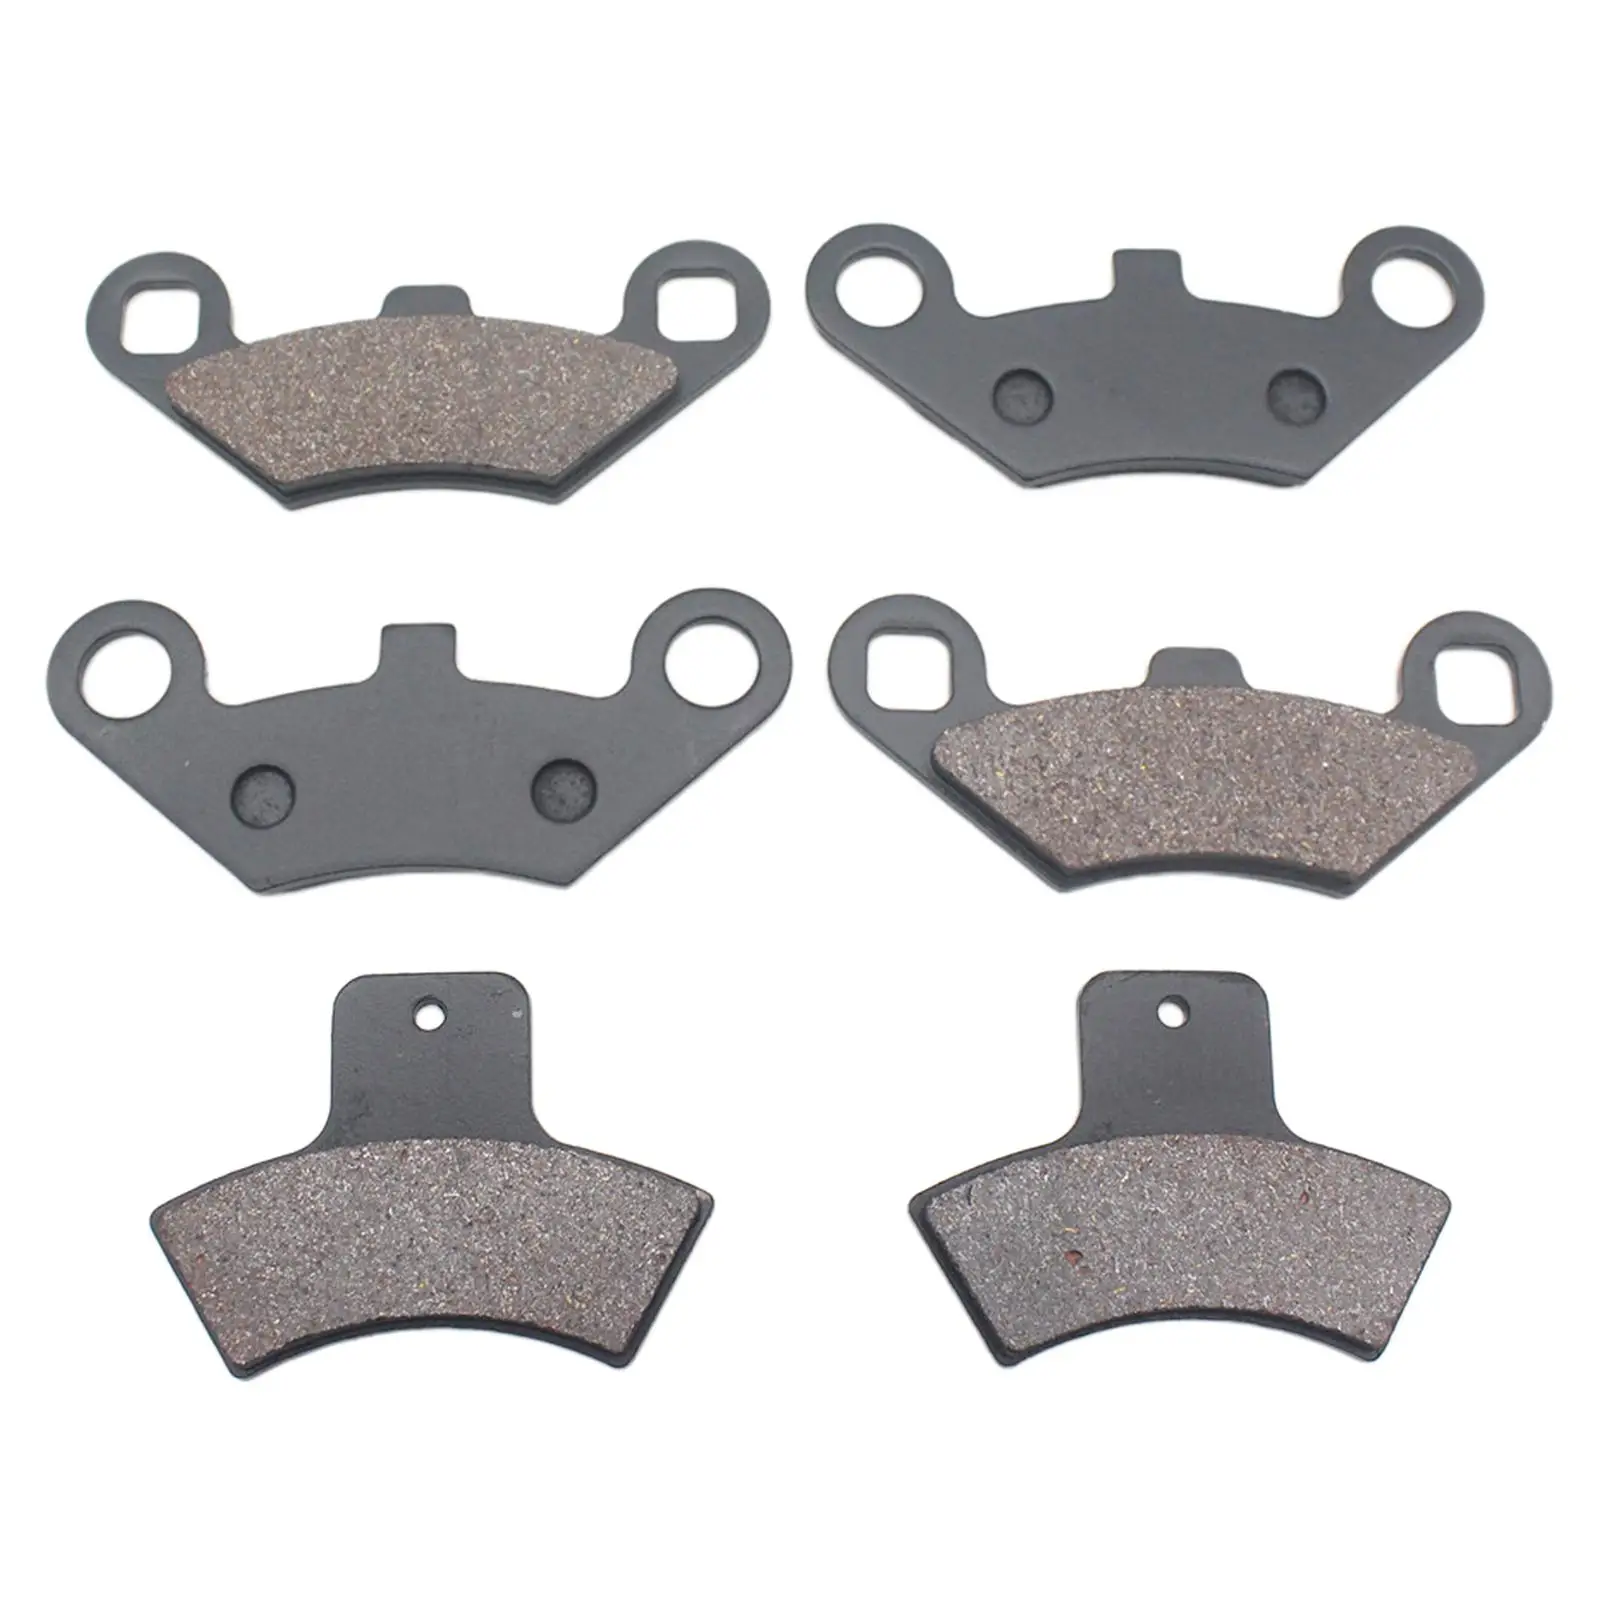 Motorcycle Front and Rear Brake Pads for 250 / 400 Scrambler 1998-2002/ 400 999 0